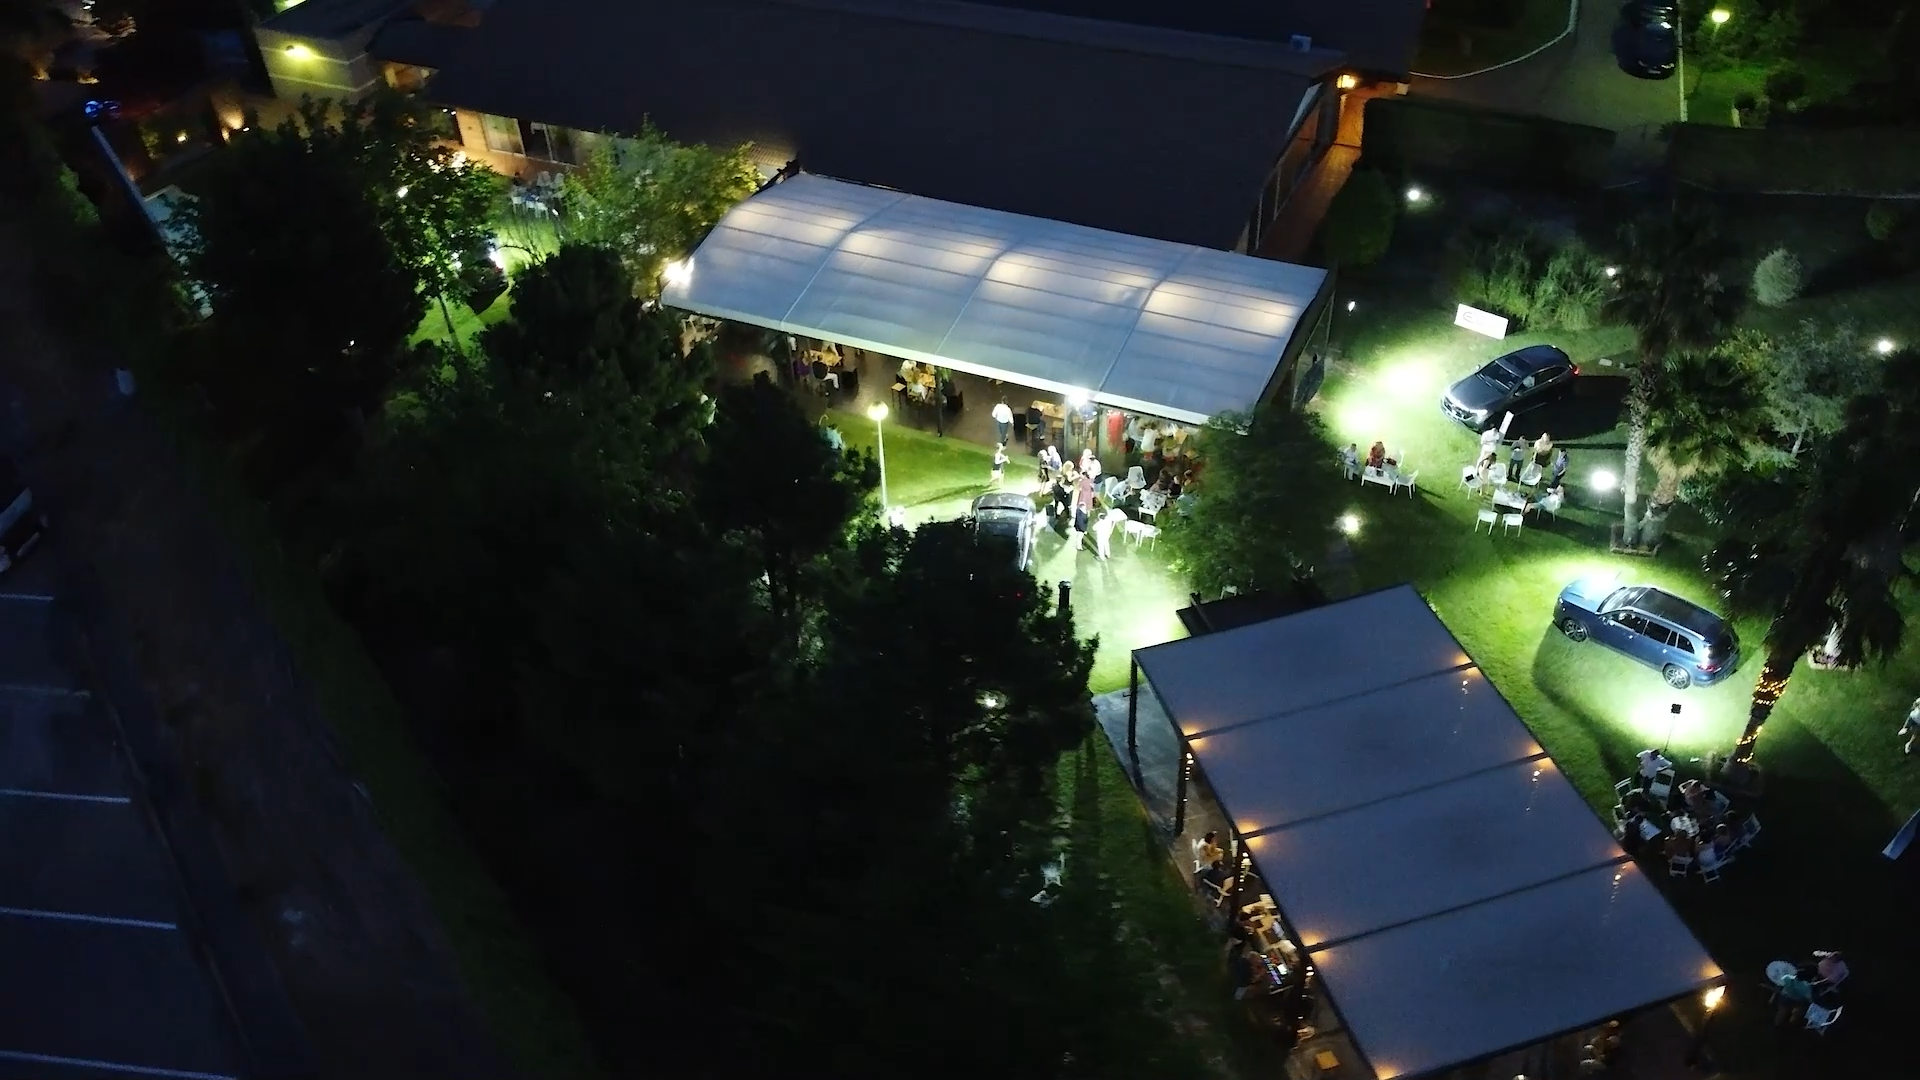 Night aera view of the Magical Garage event